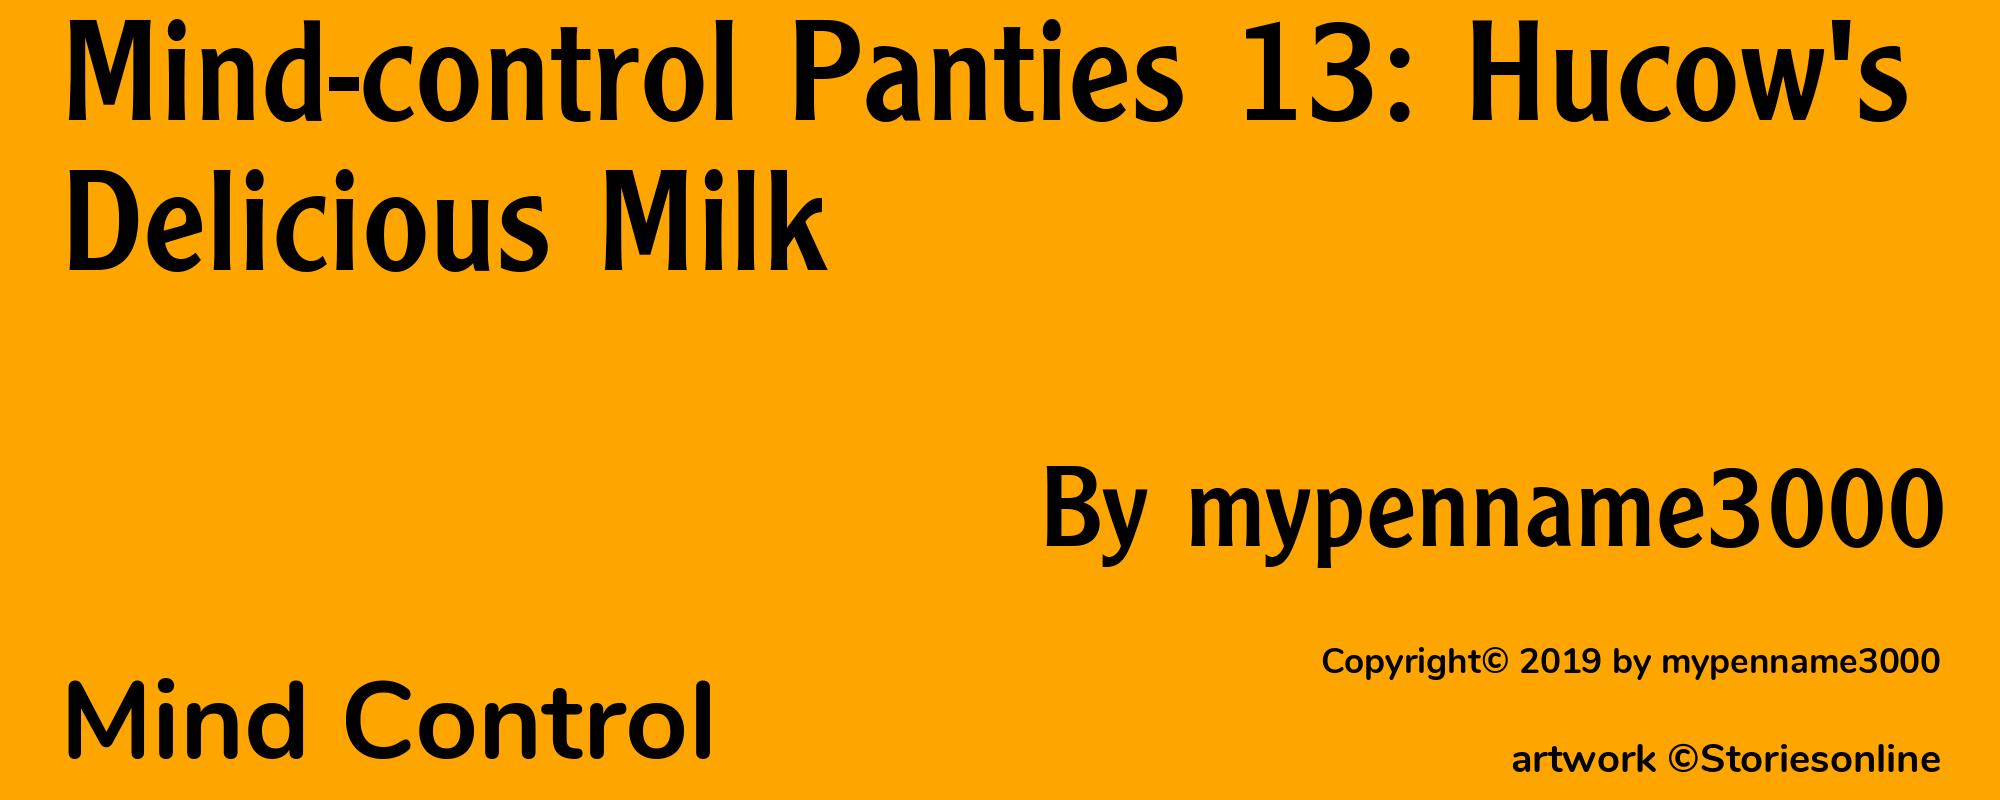 Mind-control Panties 13: Hucow's Delicious Milk - Cover